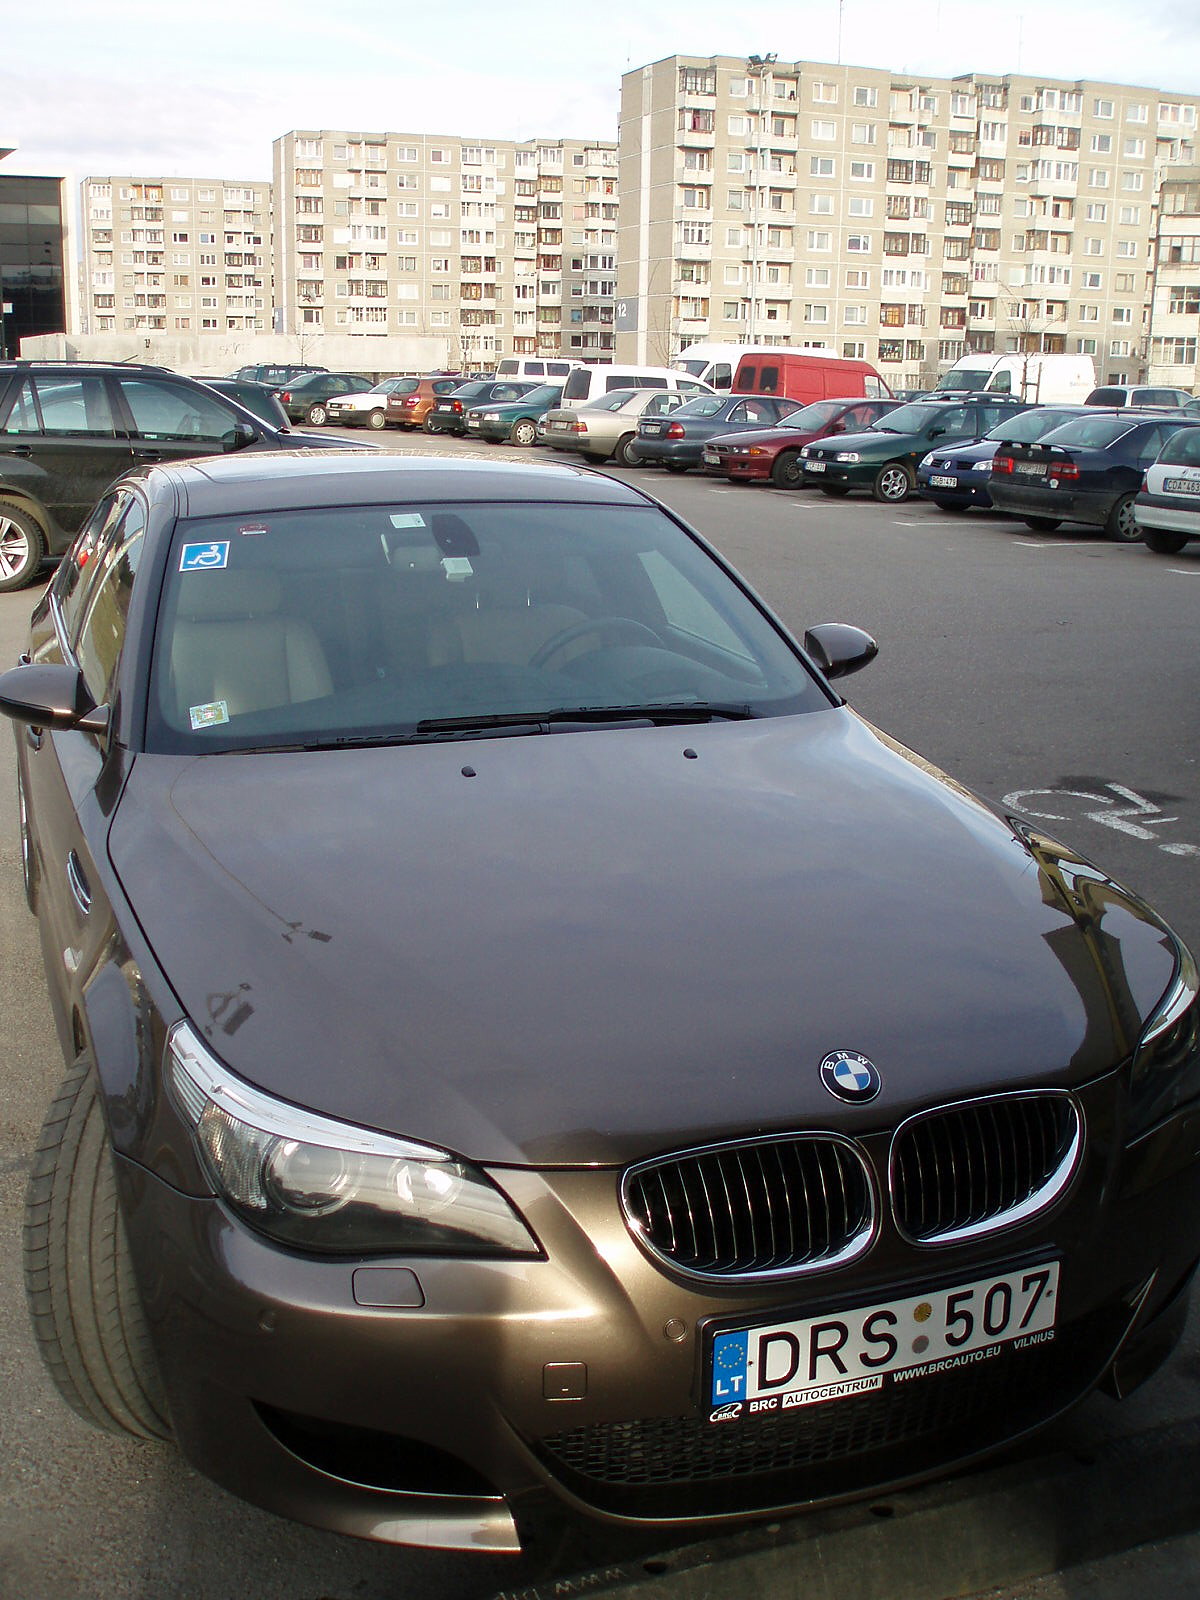 a brown bmw car is parked in the lot